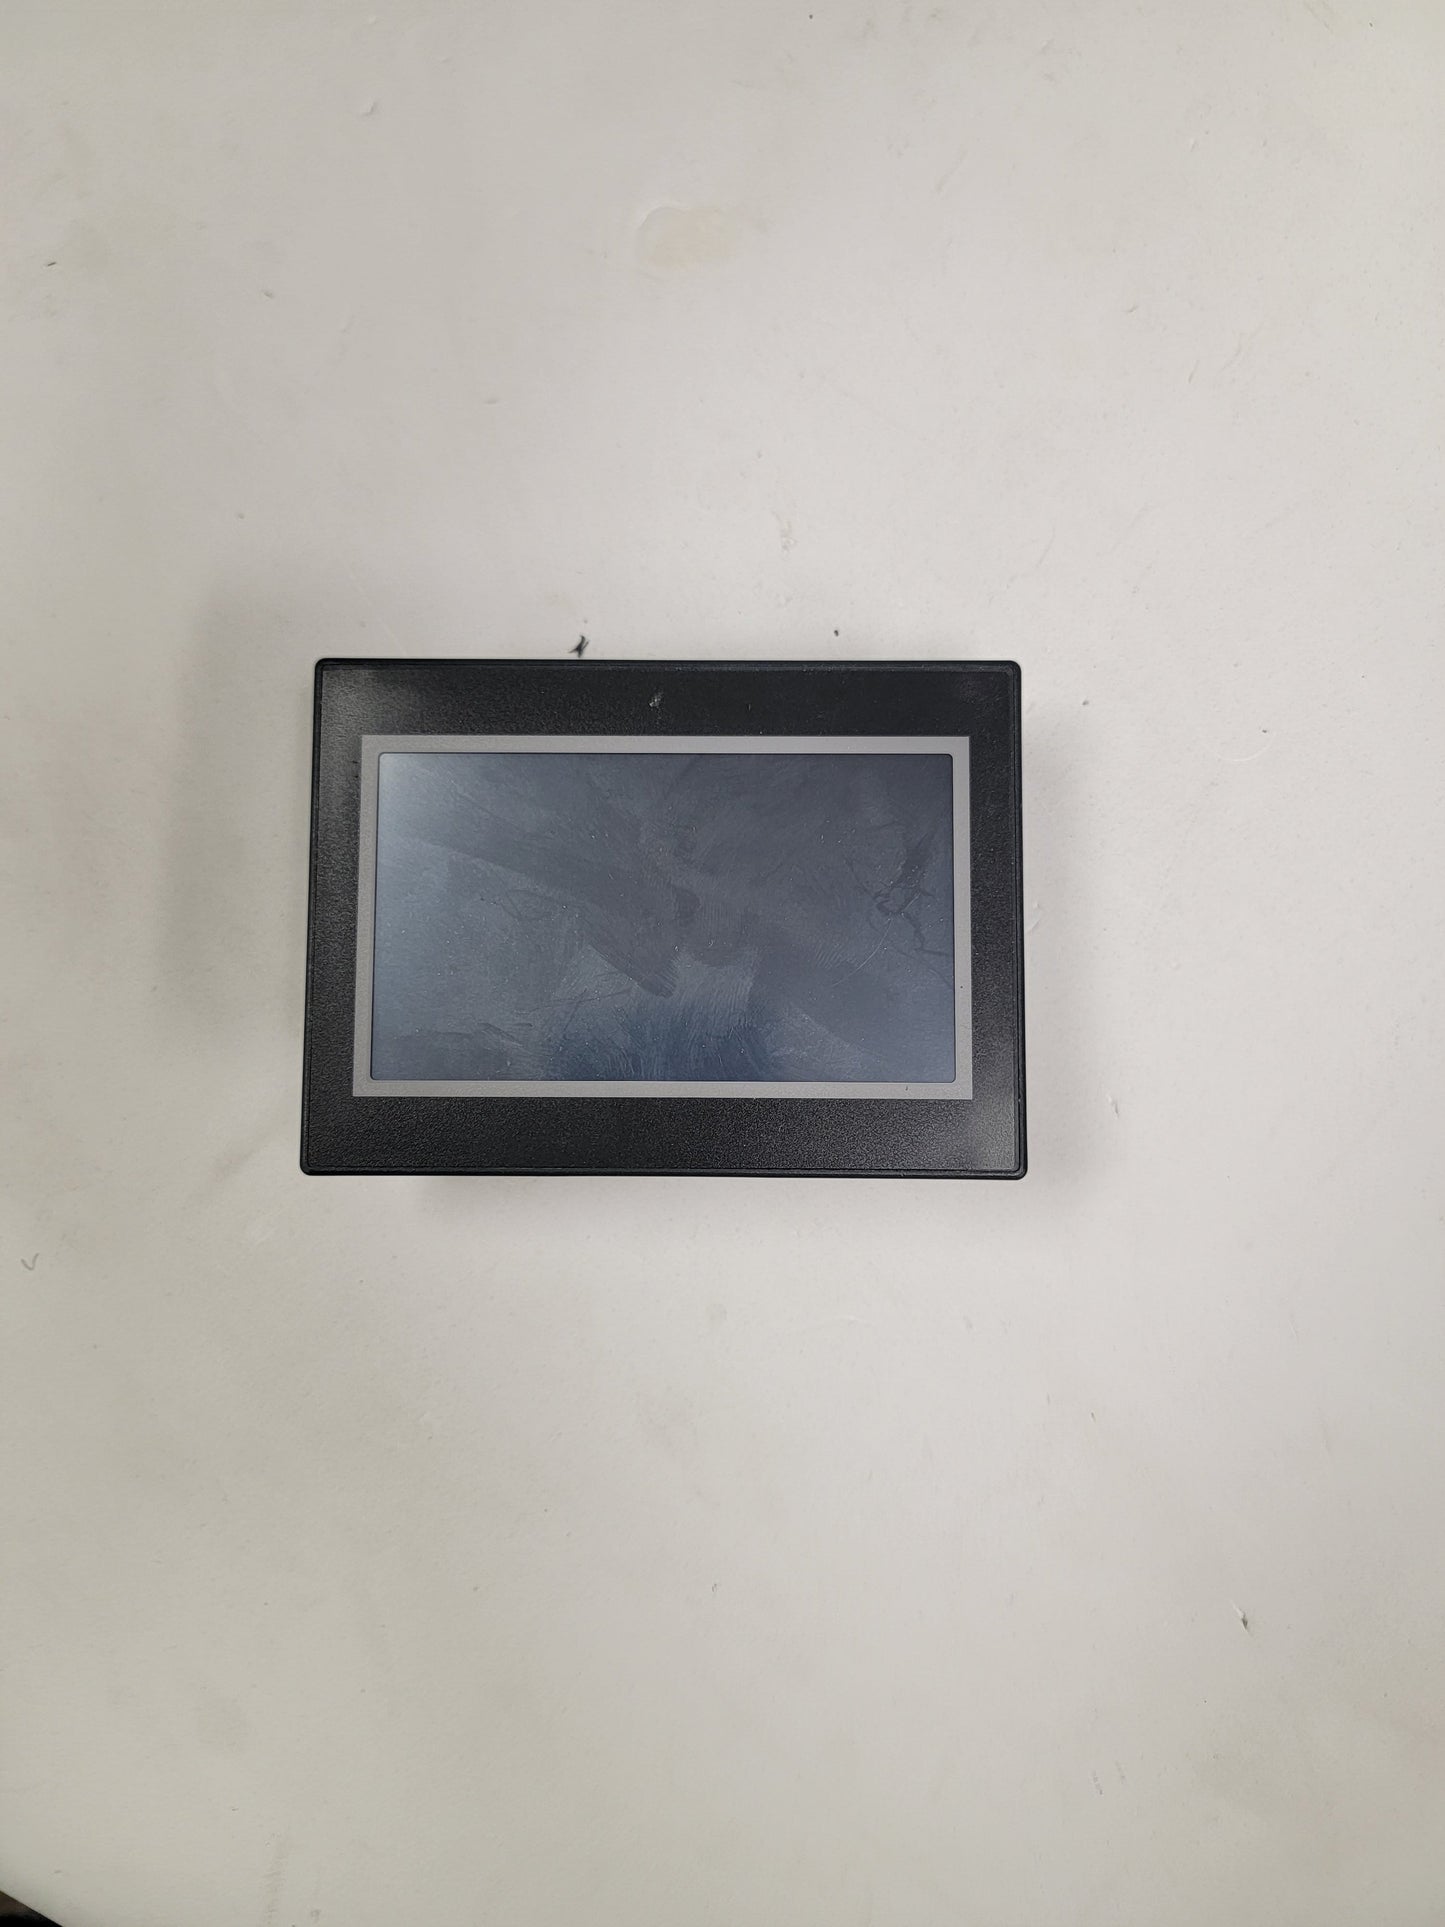 723-193131-DISPLAY, TOUCH PANEL, 3.1" LCD MONOCHROME, 5 SCREEN COLOR,